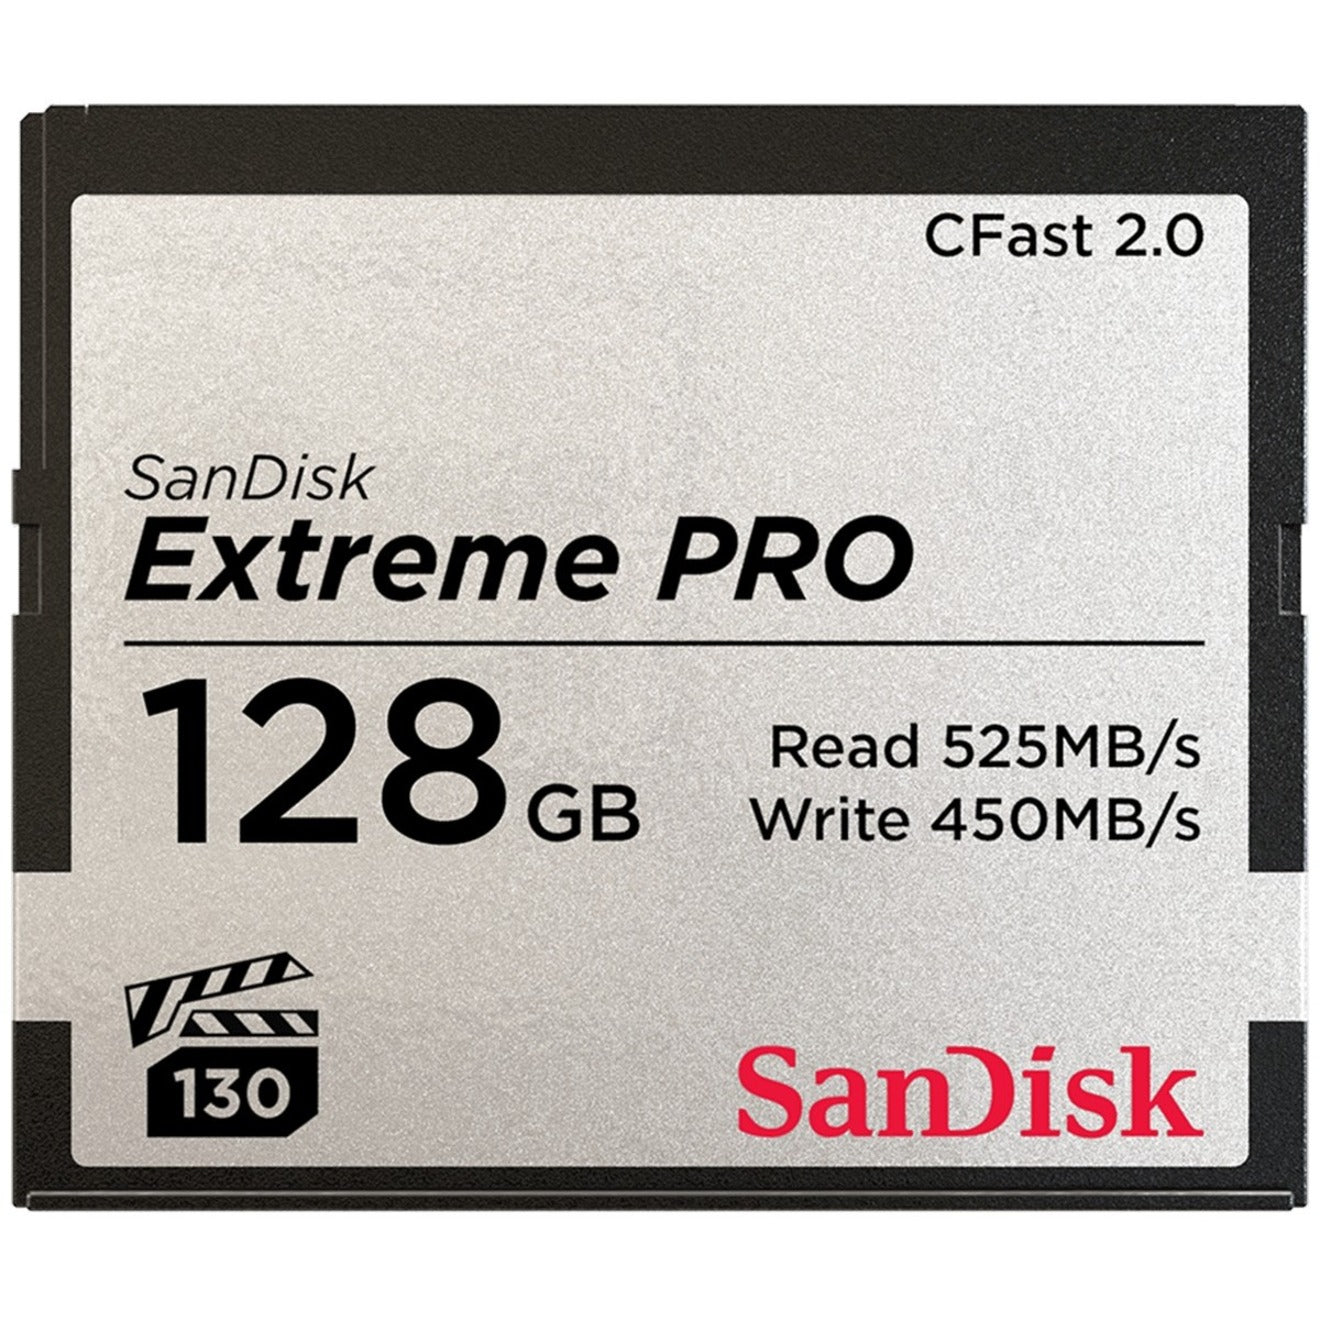 SanDisk SDCFSP-128G-A46D Extreme Pro CFast 2.0 Memory Card - 128GB, High-Speed Performance for Professional Photography and Videography